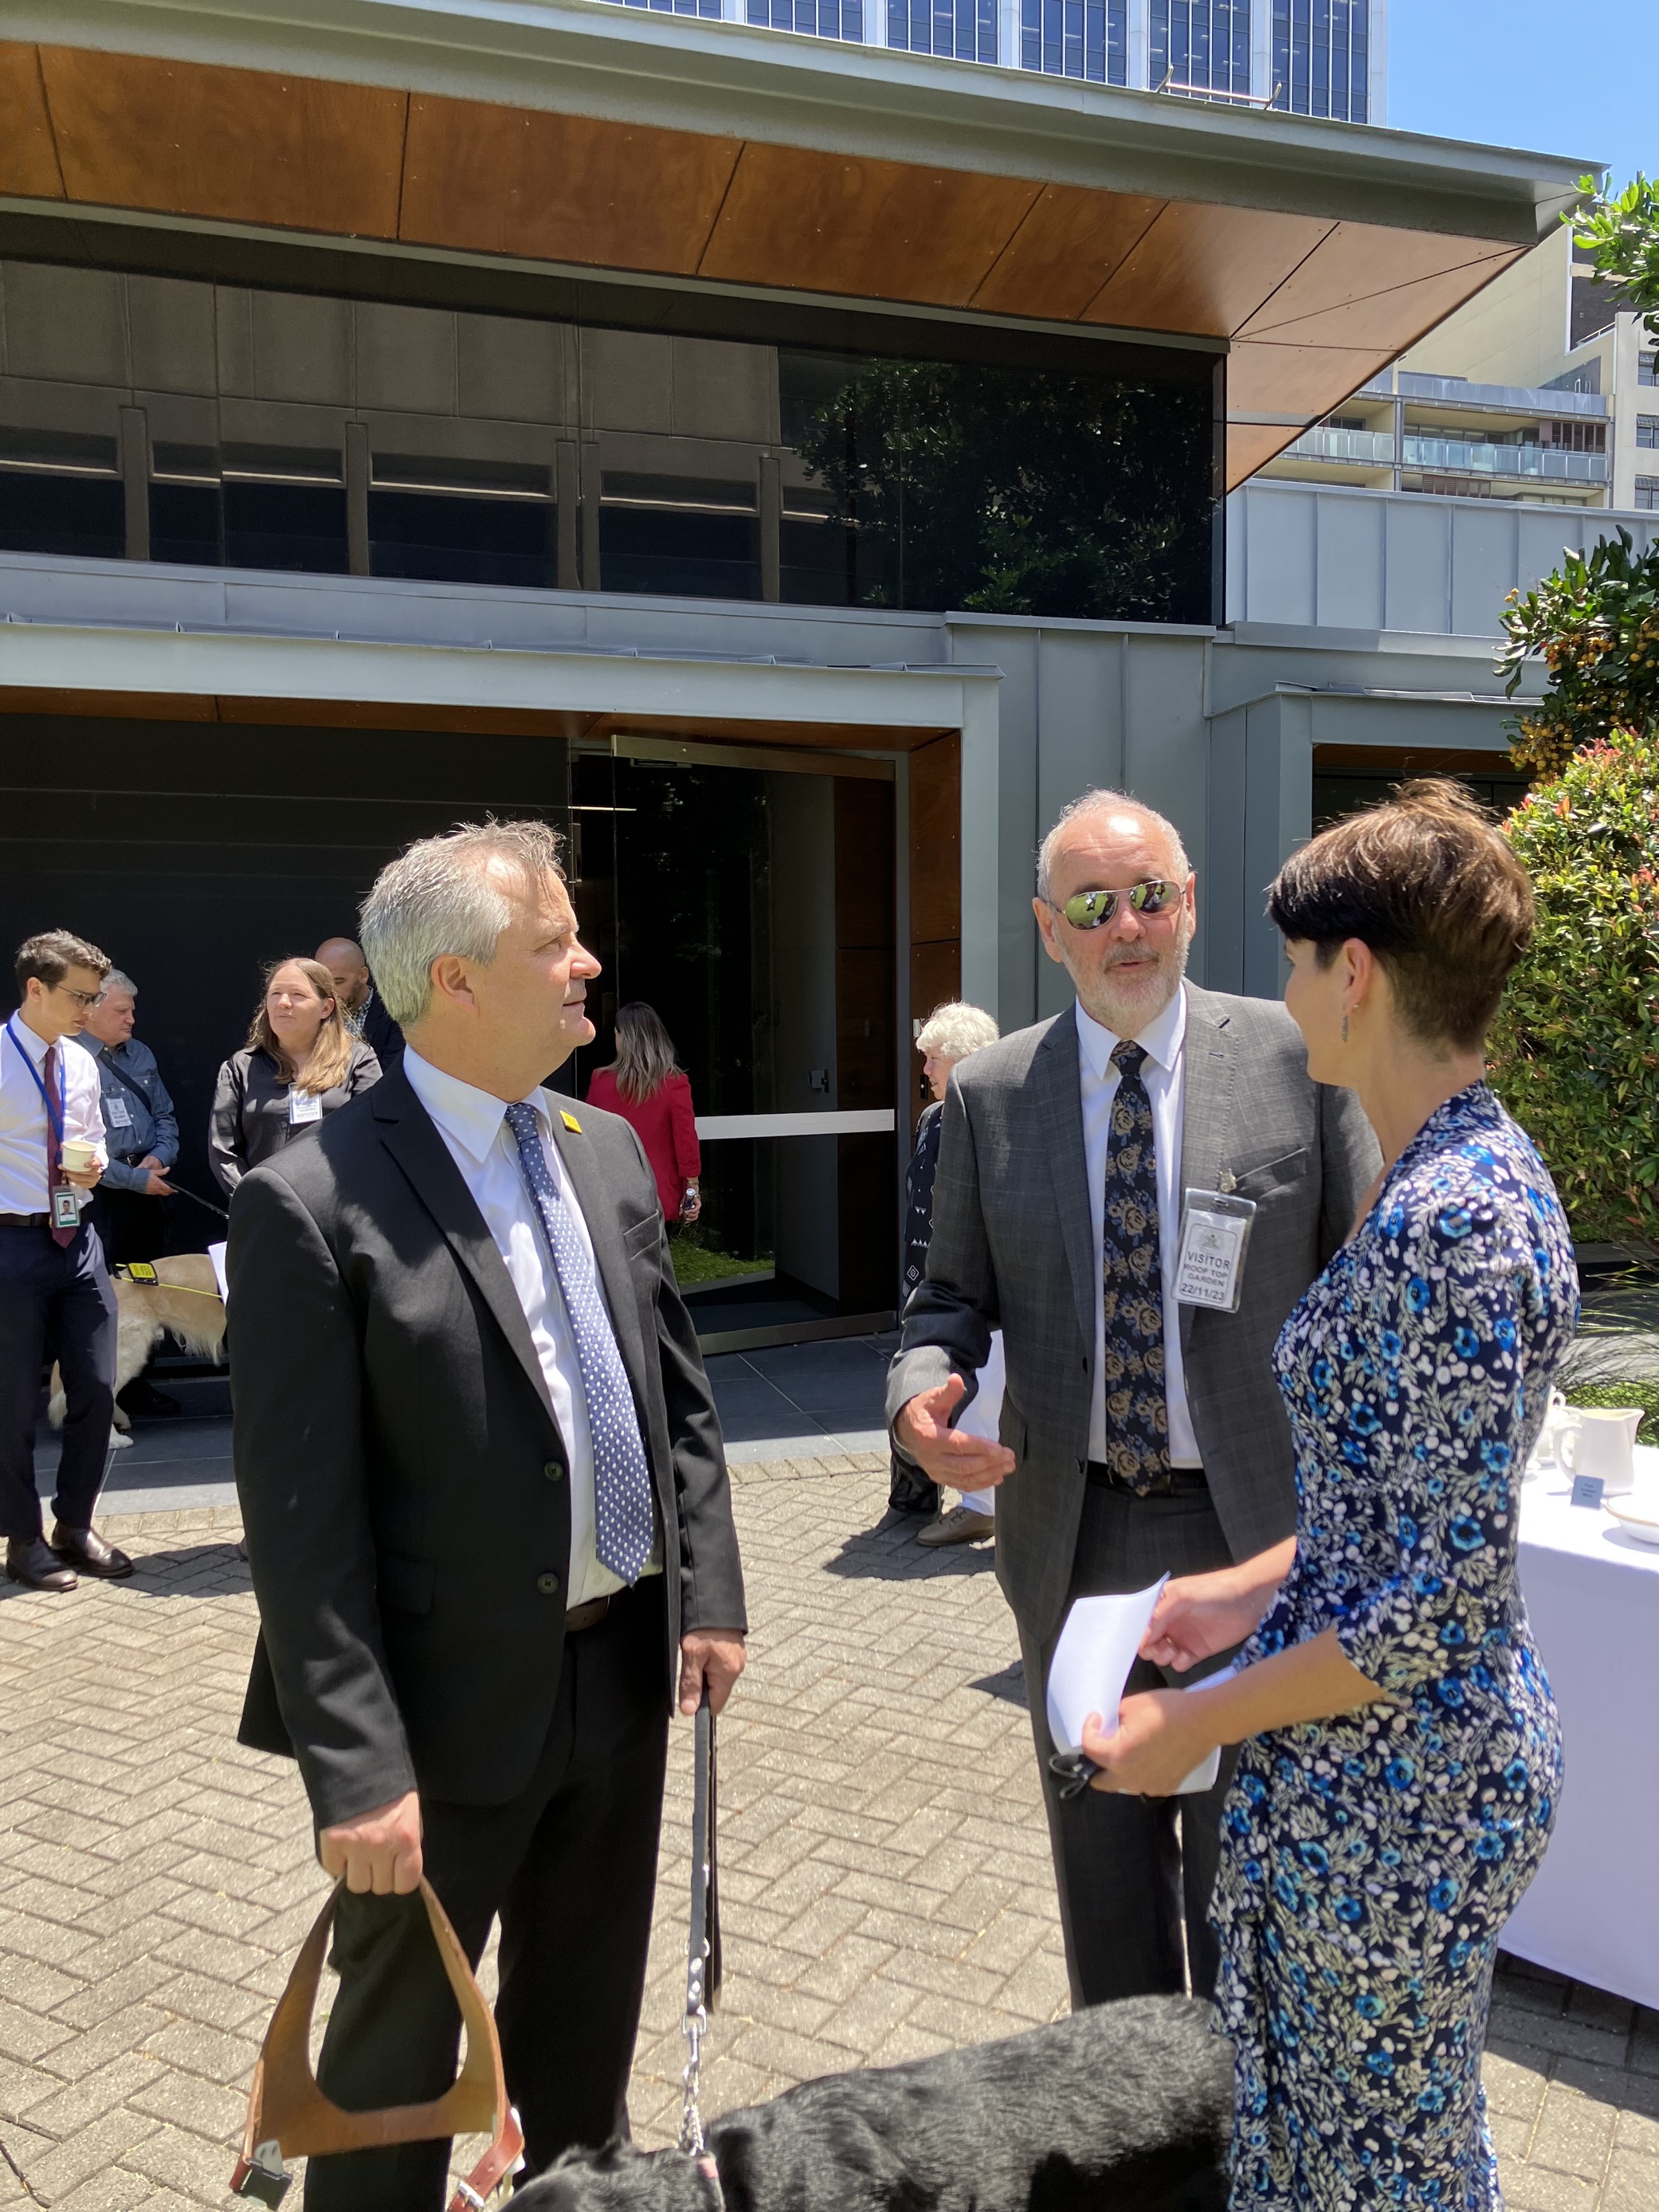 Ron Hooton, CEO Vision AUstralia, Chris Edwards, Director Government relations and Kate Washington, NSW Minister for Disability Inclusion, talking outside Parliament House